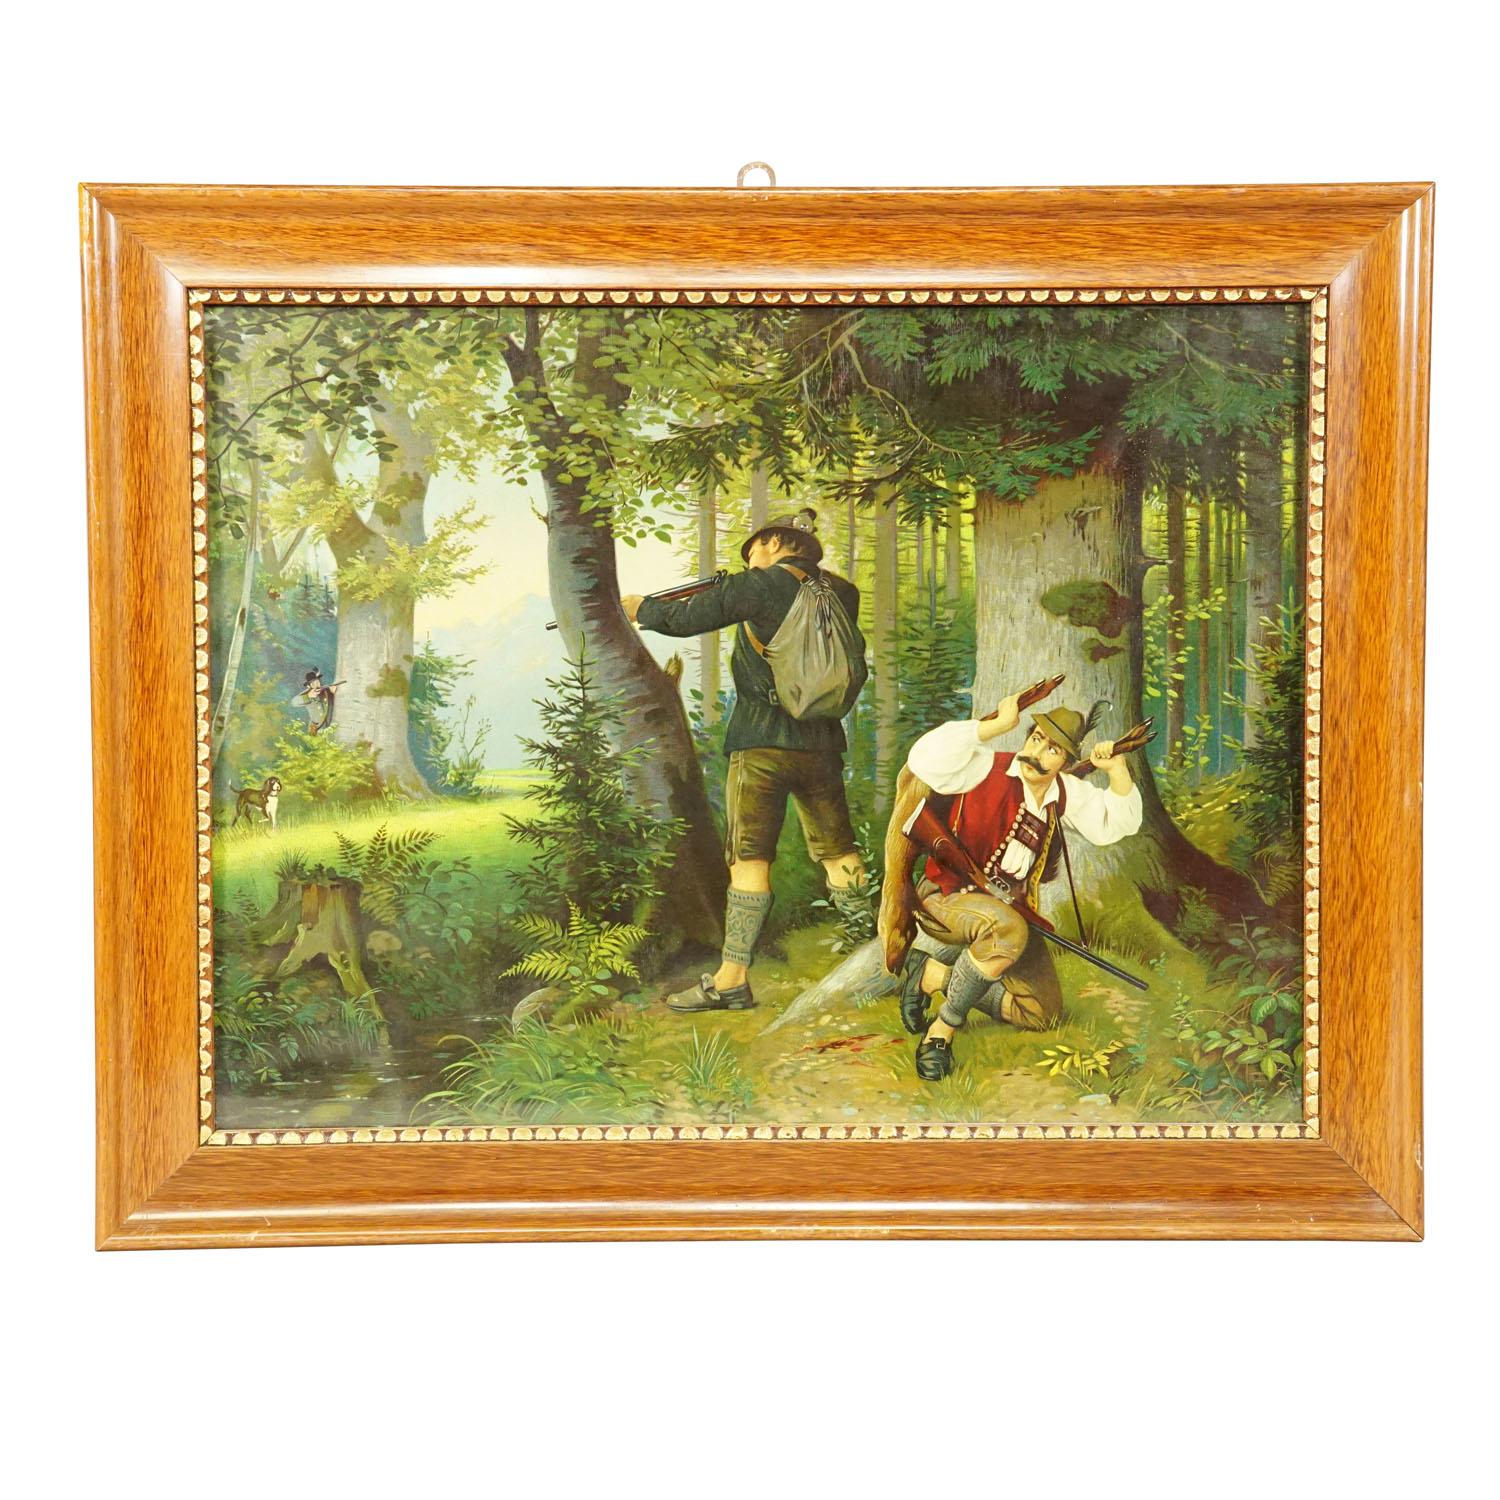 Antique Oil Print with Dramatic Poacher Scene after Josef Ringeisen.

A colorful oil print depicting a dramatic poaching scenery in the bavarian forest. Two poachers are caught in the act and one of them tries to shoot the hunter while the other